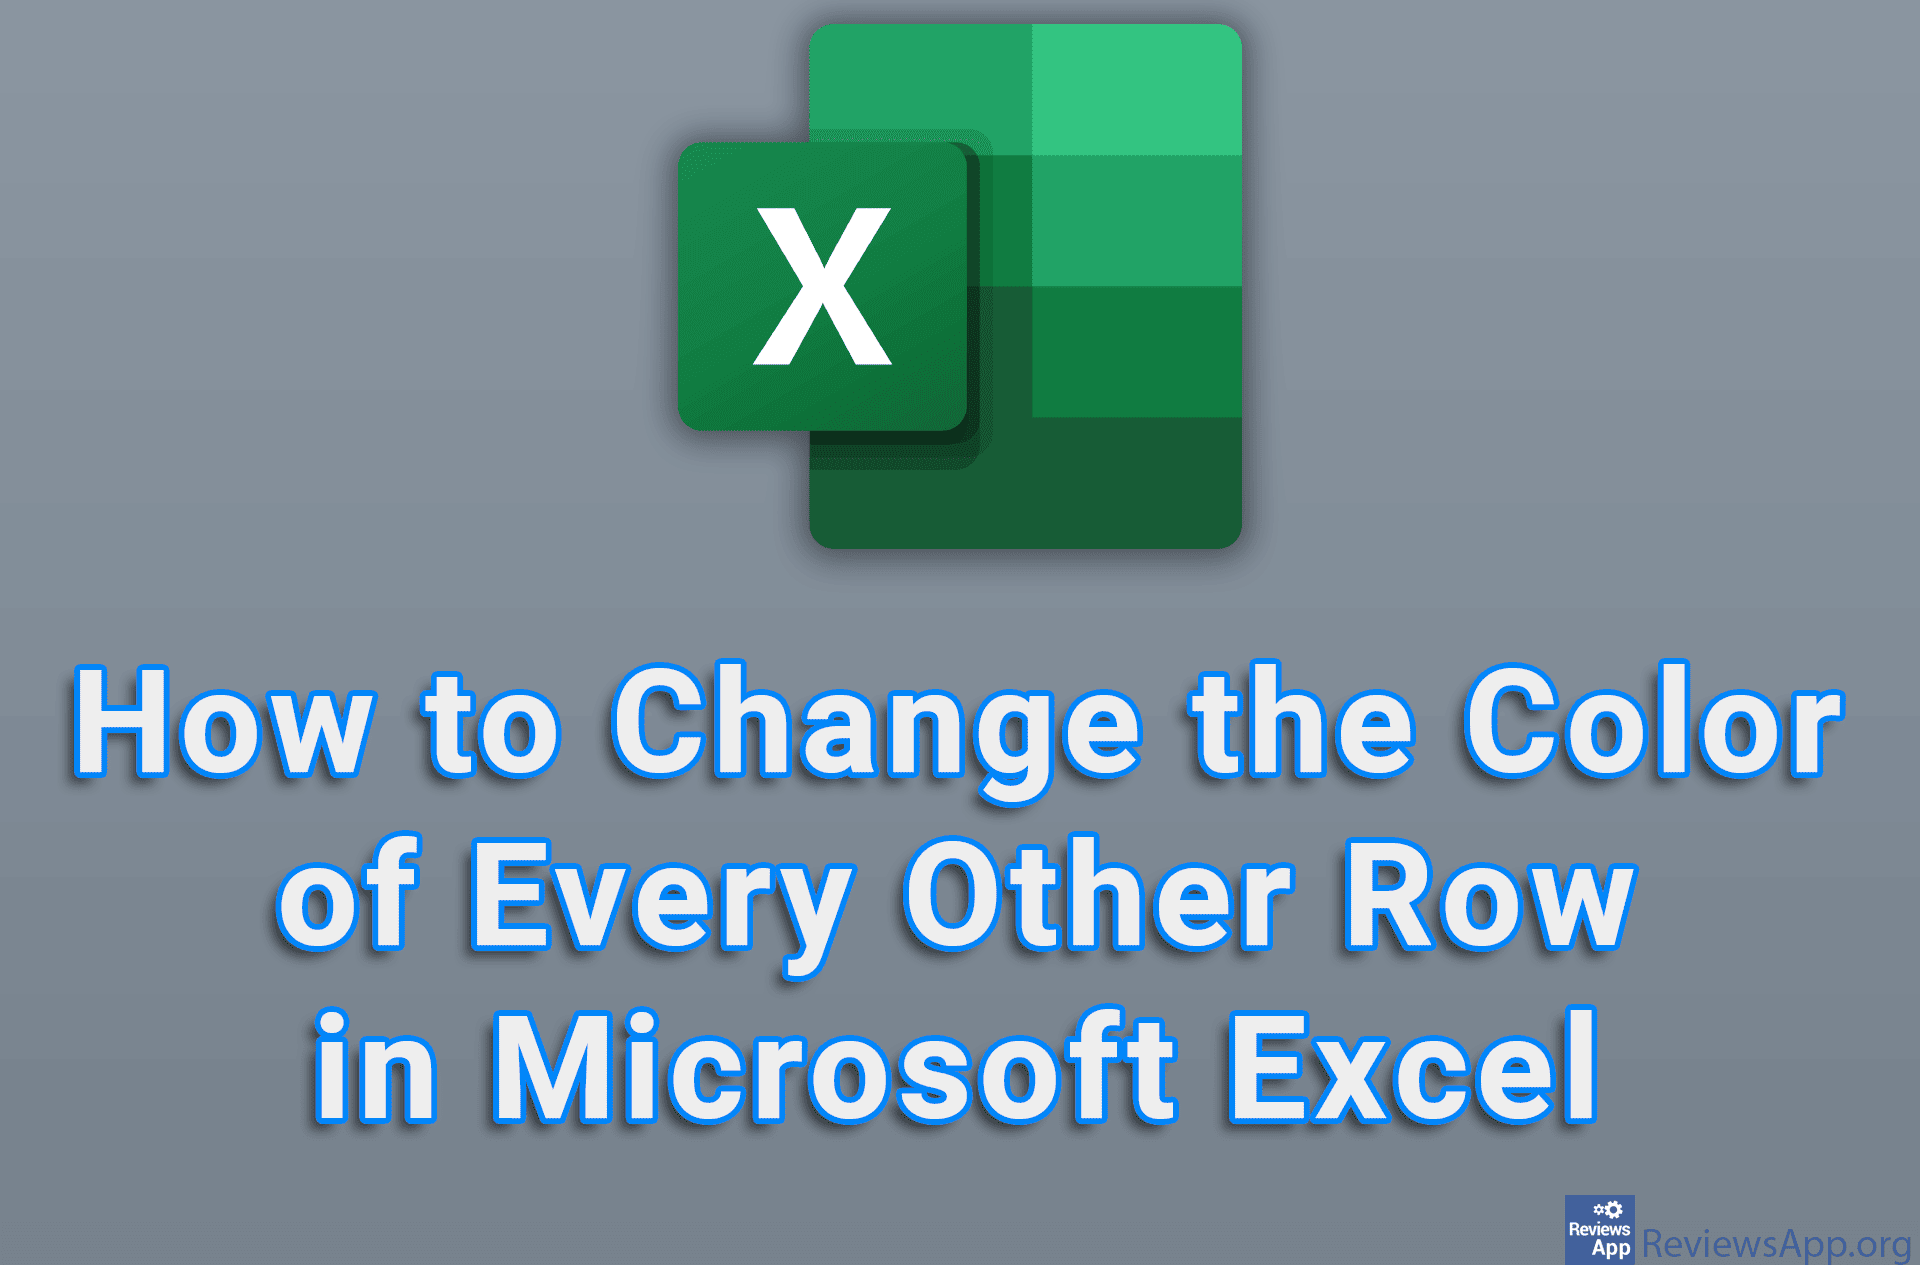 How to Change the Color of Every Other Row in Microsoft Excel